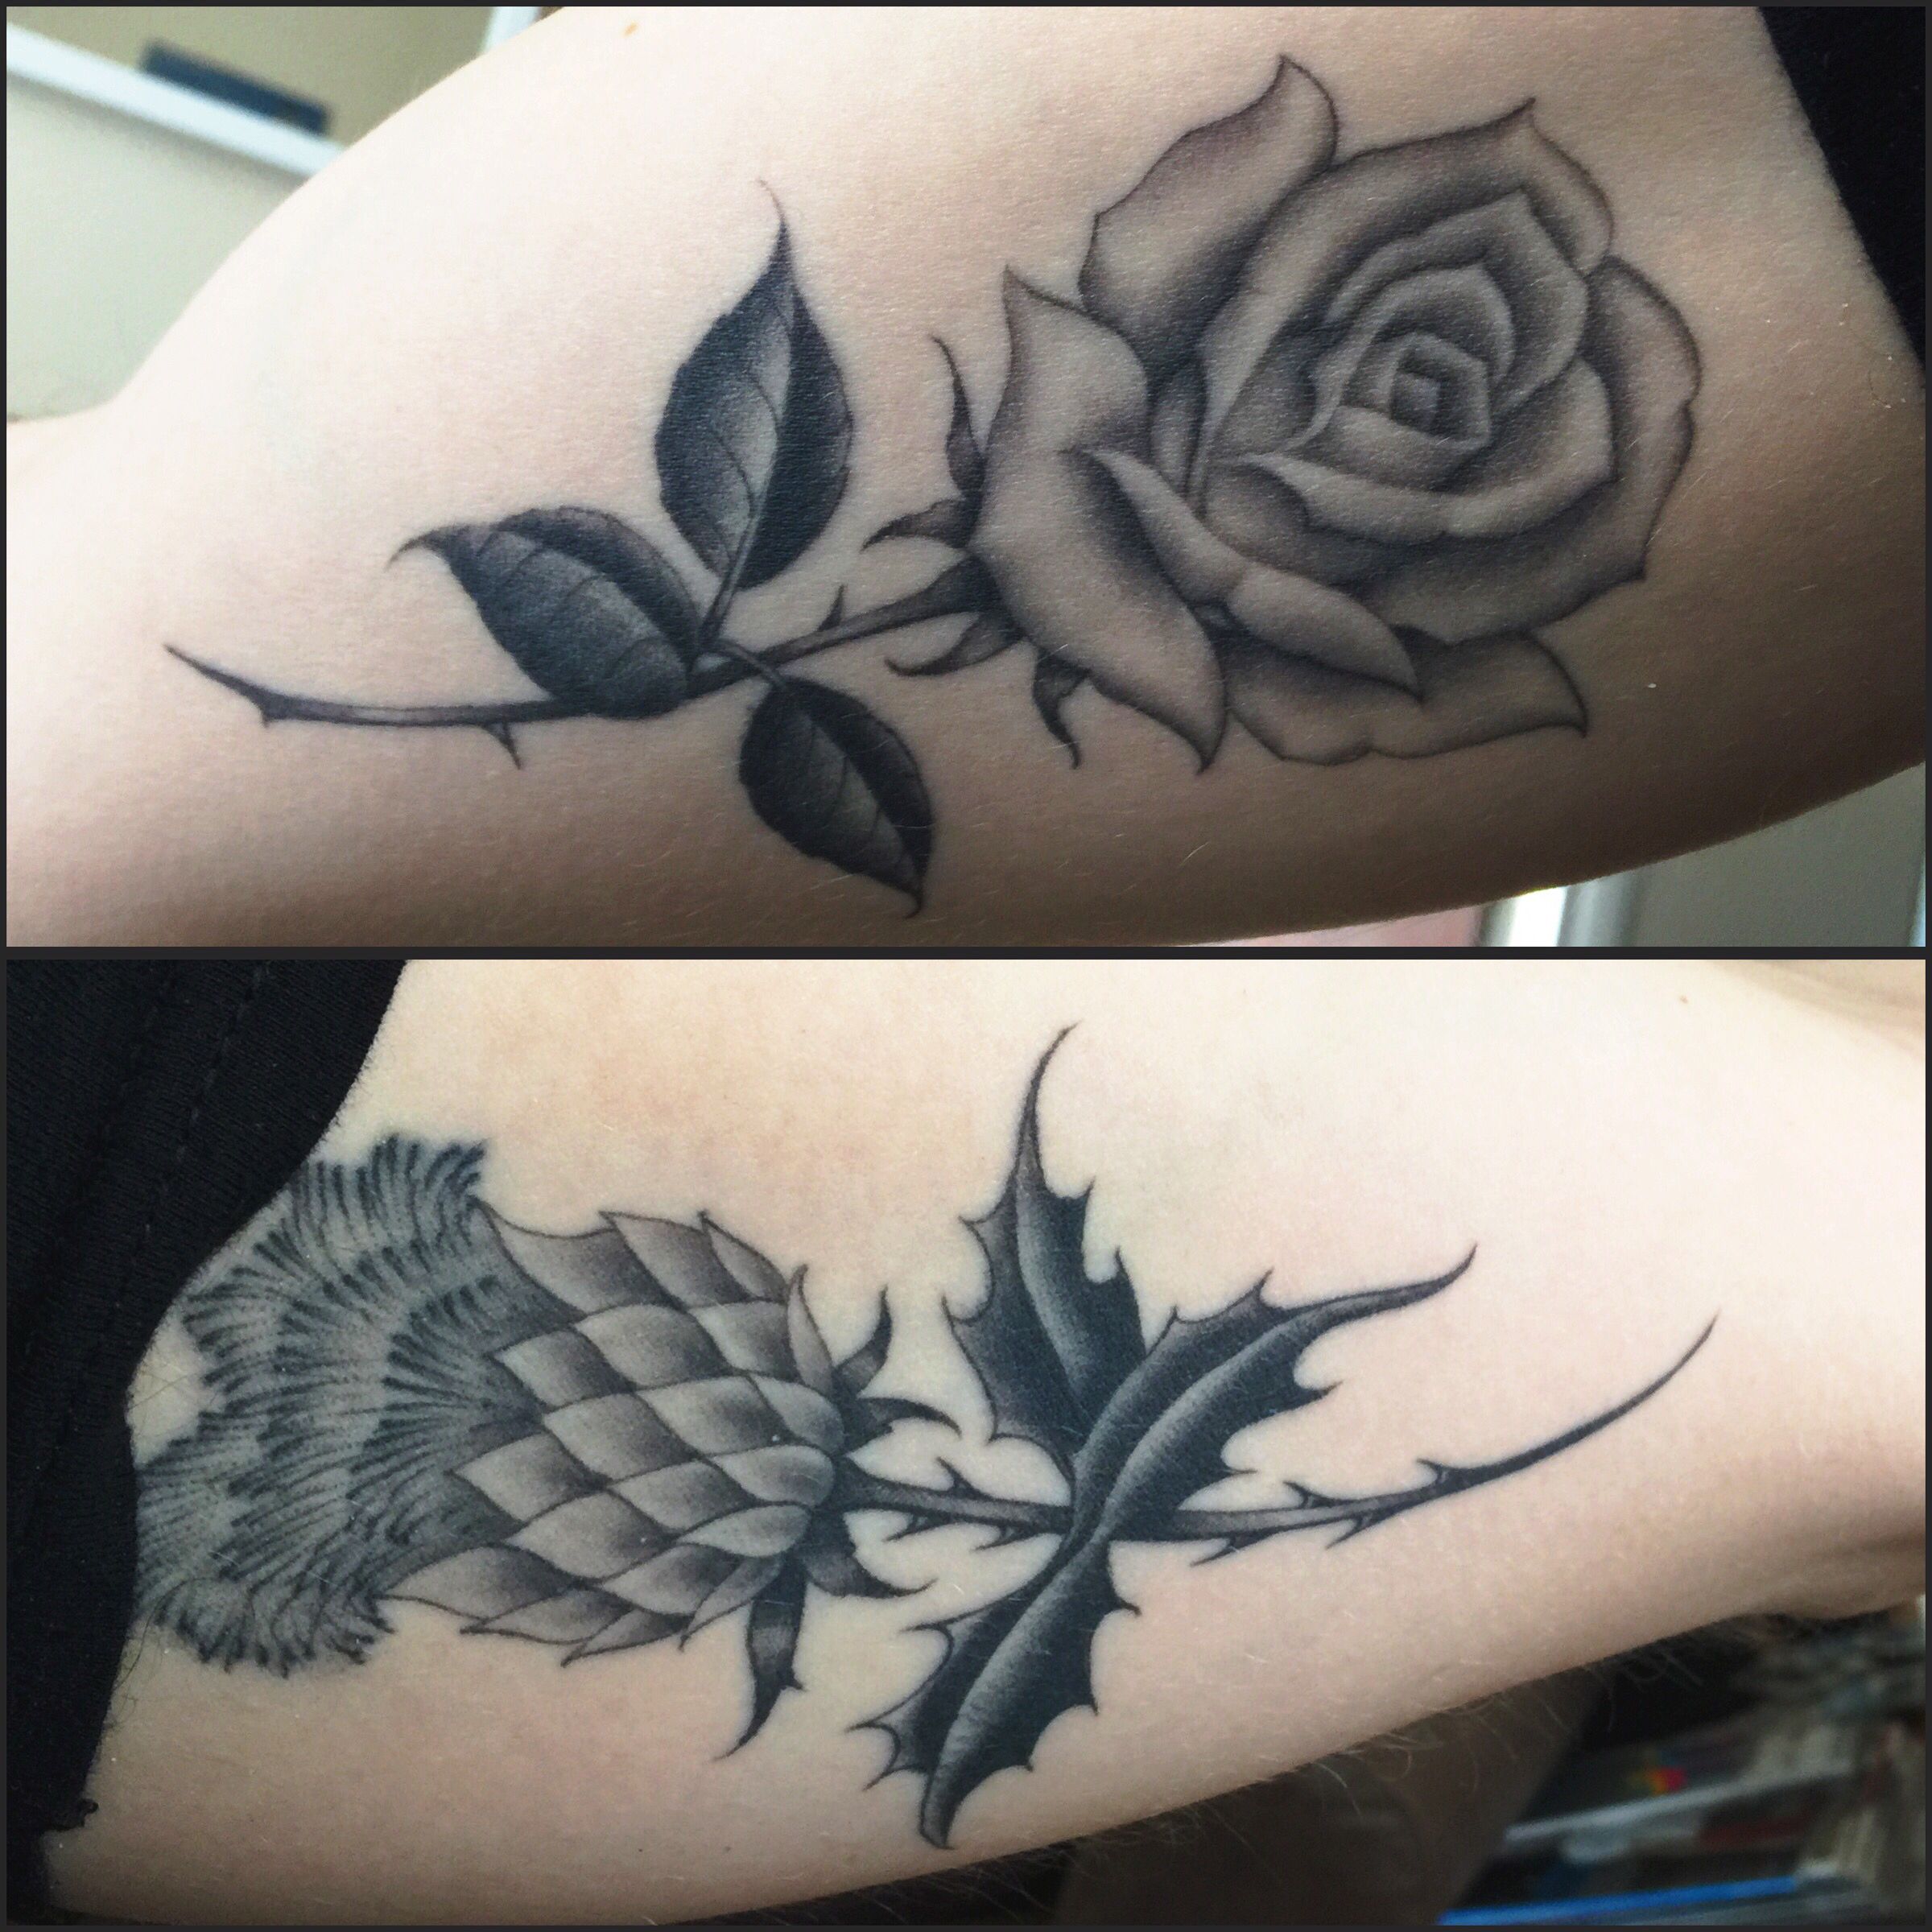 My arm tattoos - inspired by my English father and Scottish mother ...